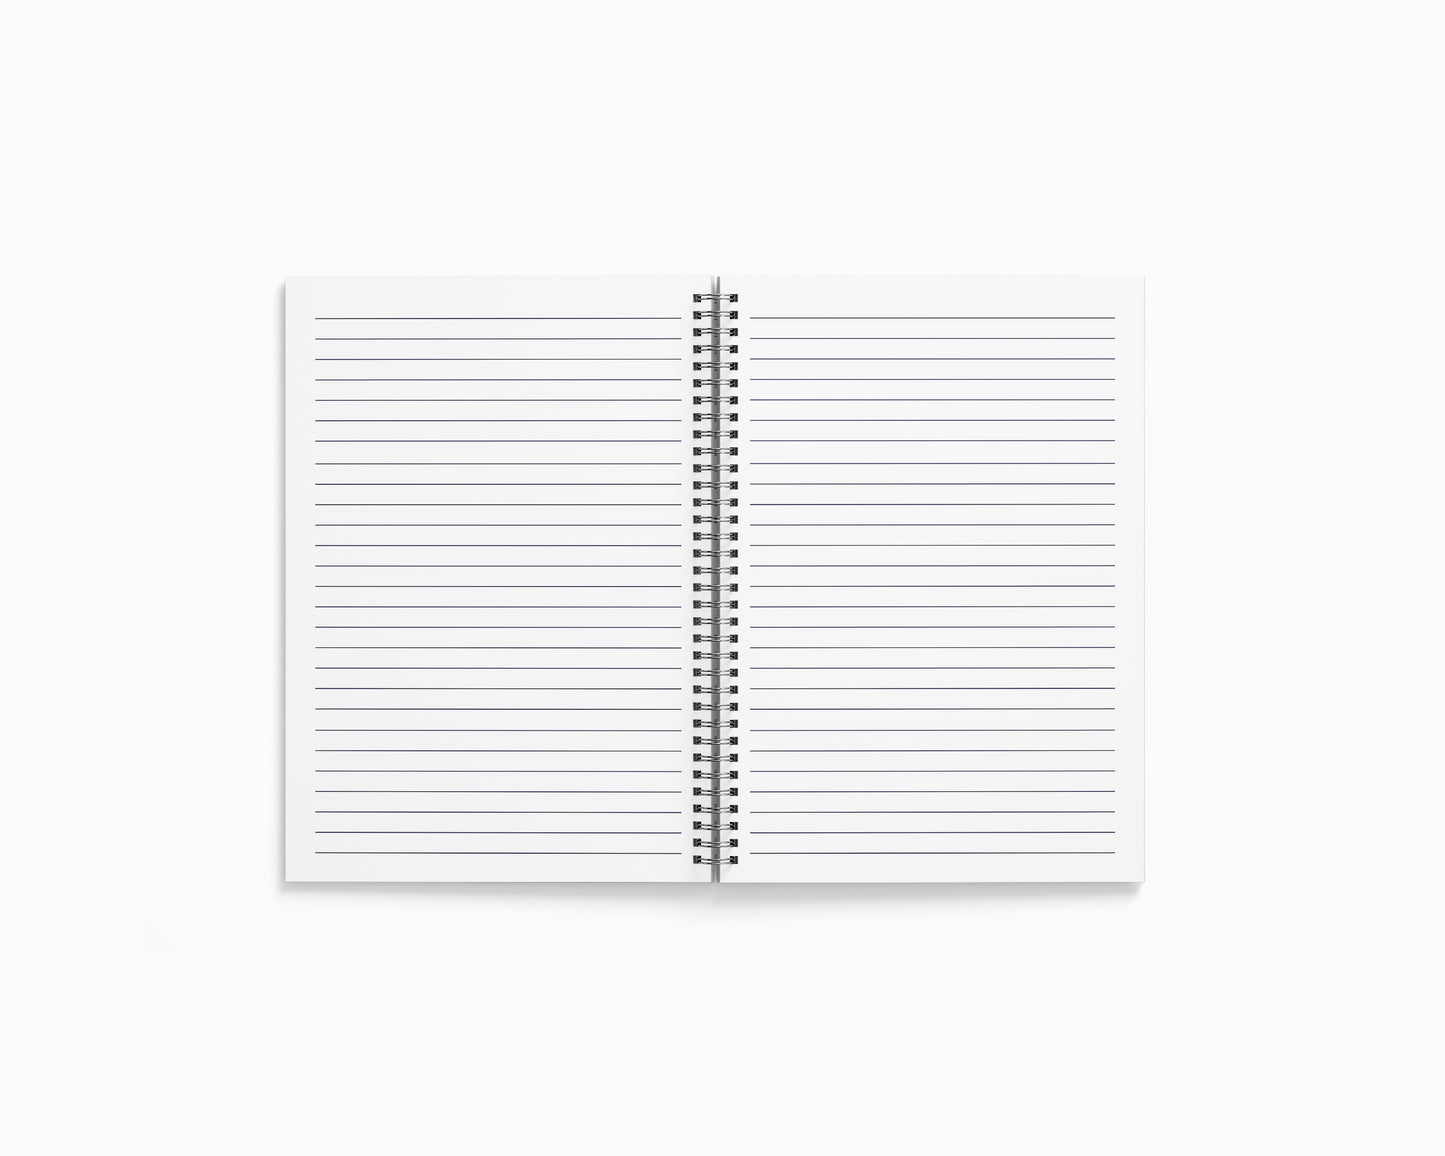 Chimbel Notebook (A5 Size, 100 Pages, Ruled)